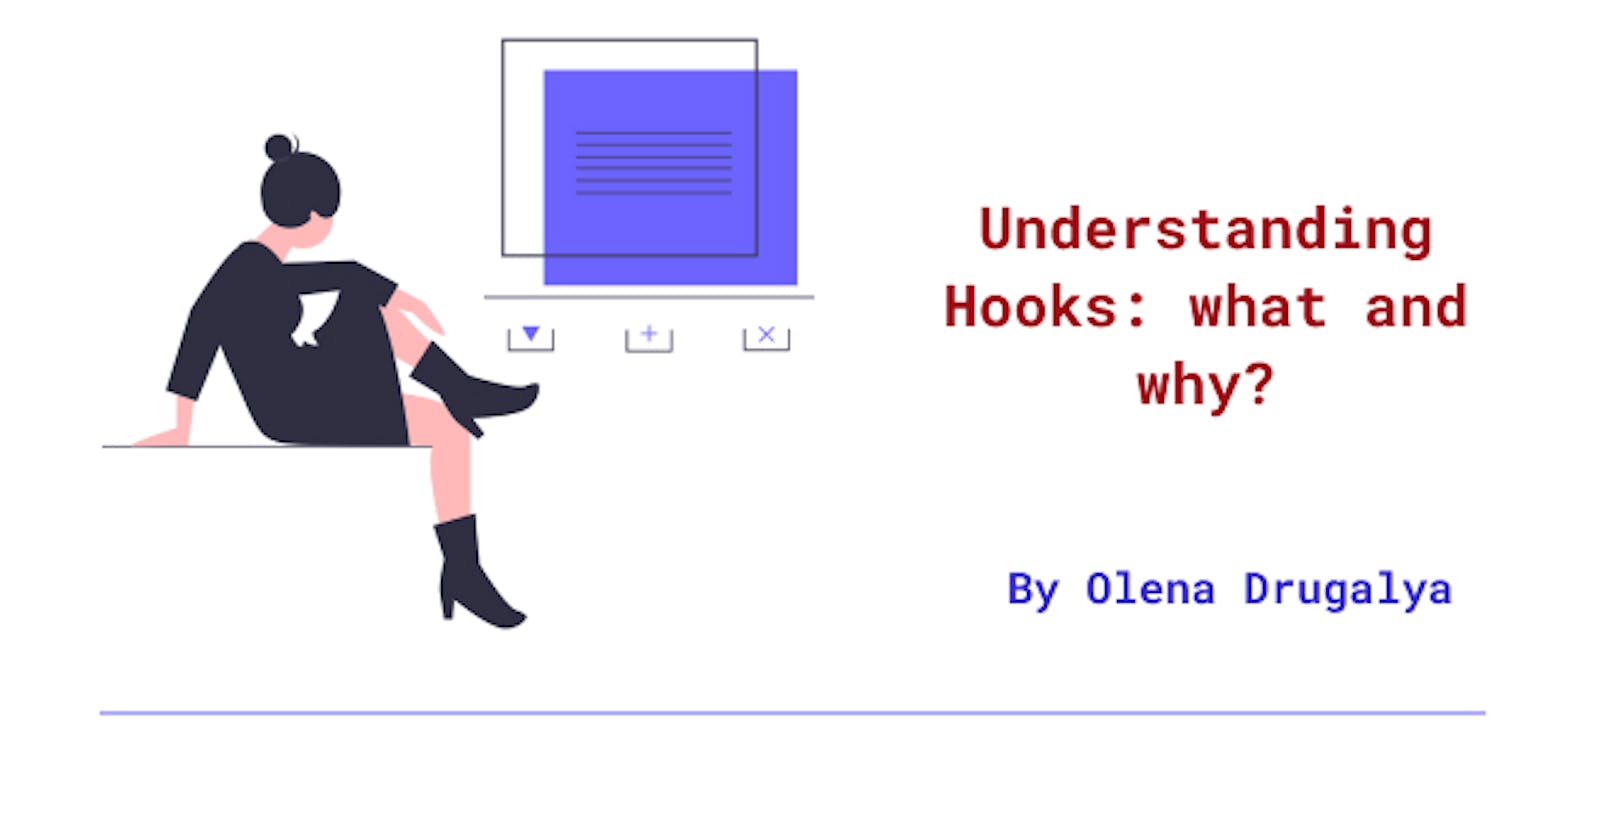 Understanding Hooks : what and why?